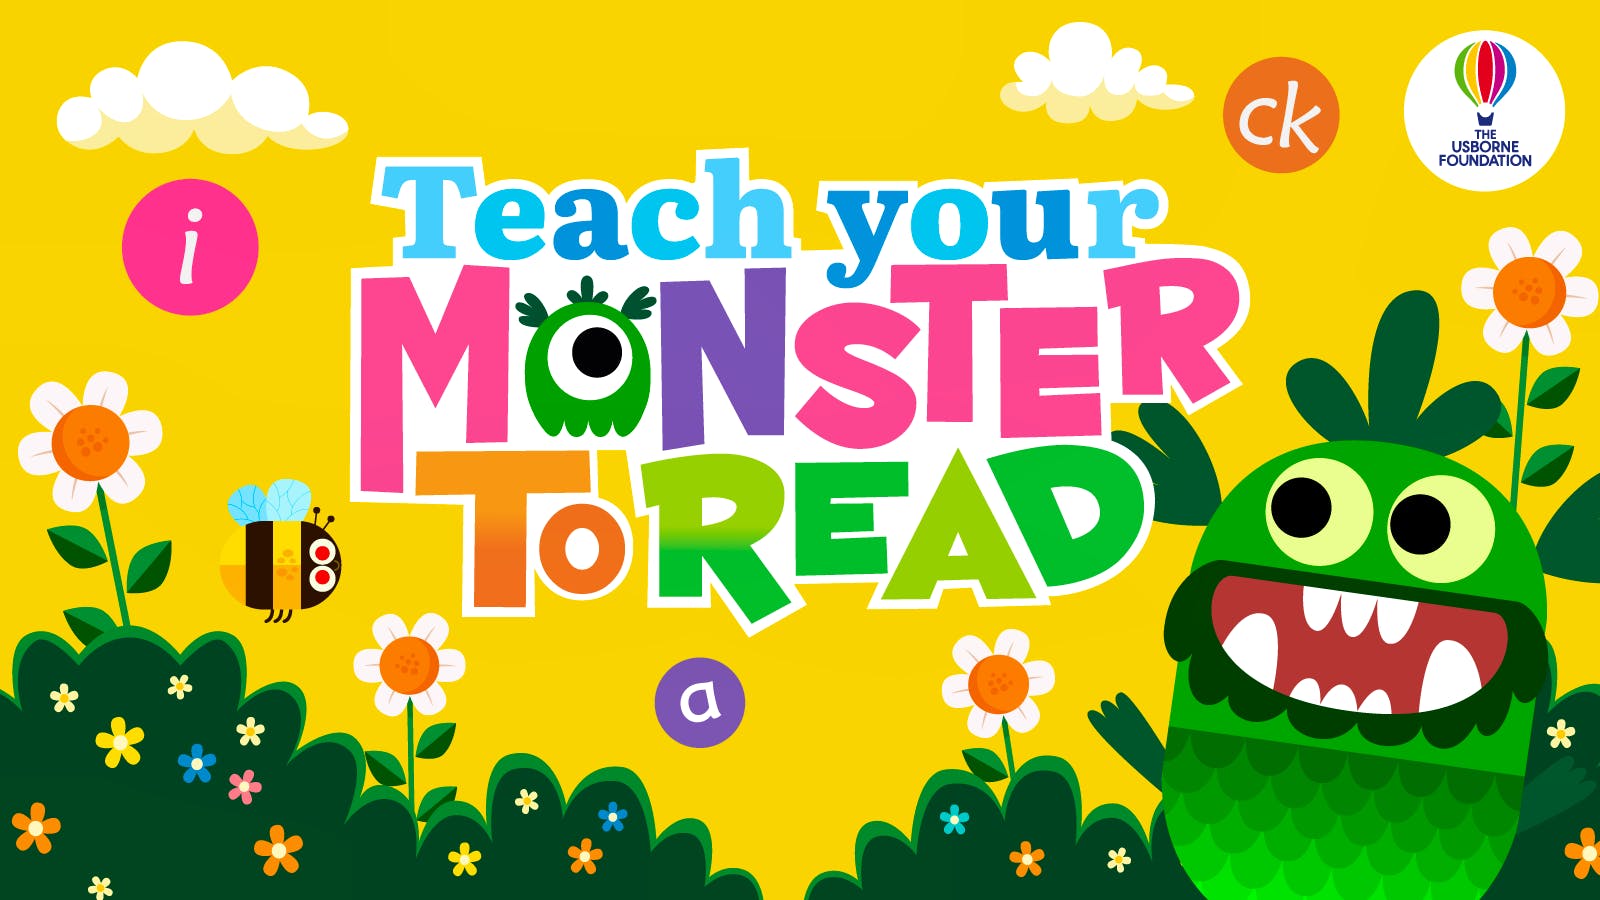 Teach　games　to　phonics　Read:　Your　and　reading　Monster　Award-winning